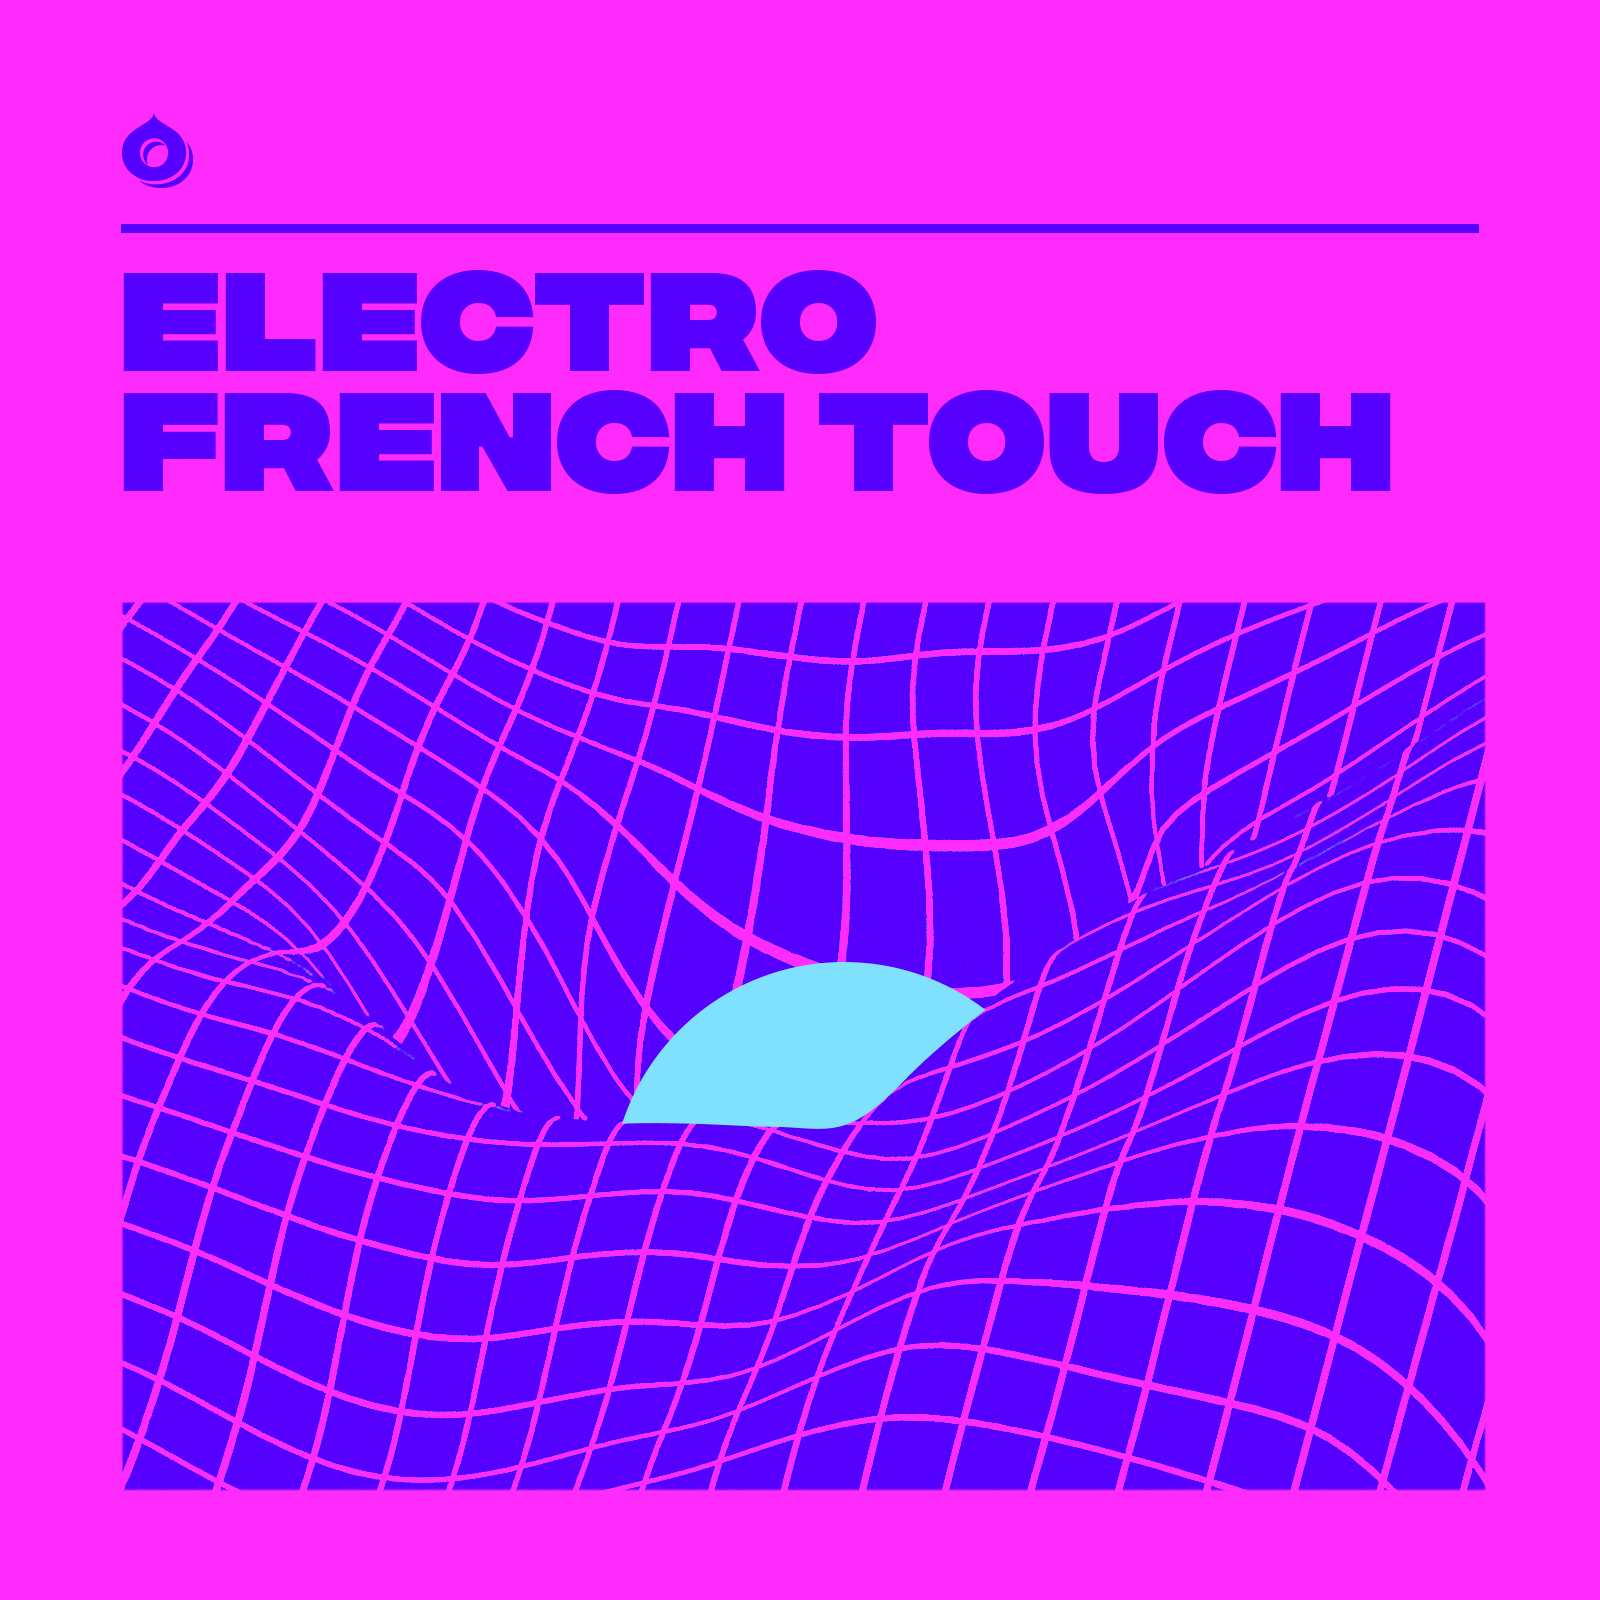 1 _ ELECTRO_FRENCH TOUCH